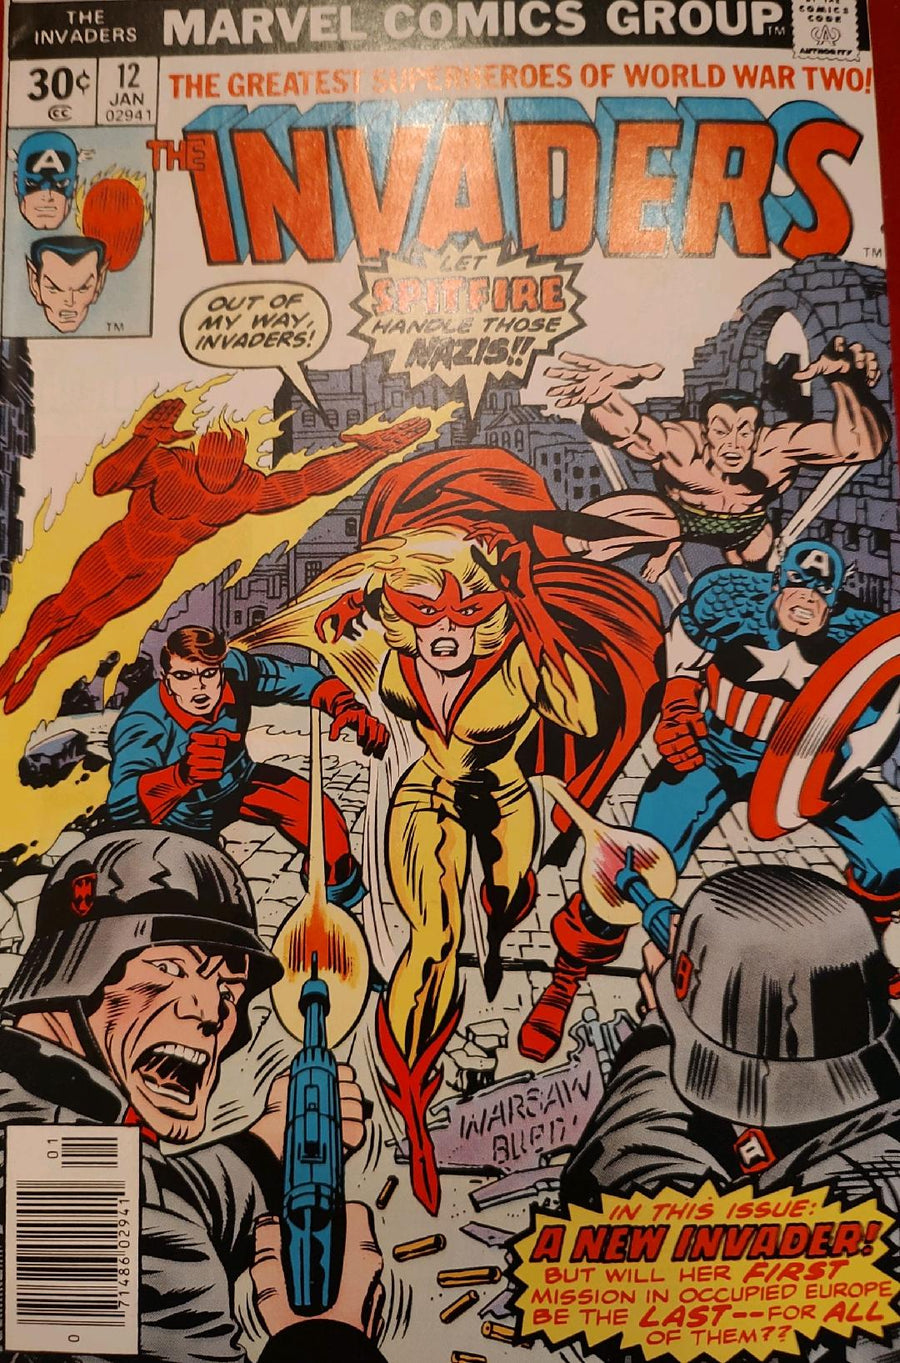 The Invaders #12 Comic Book Cover